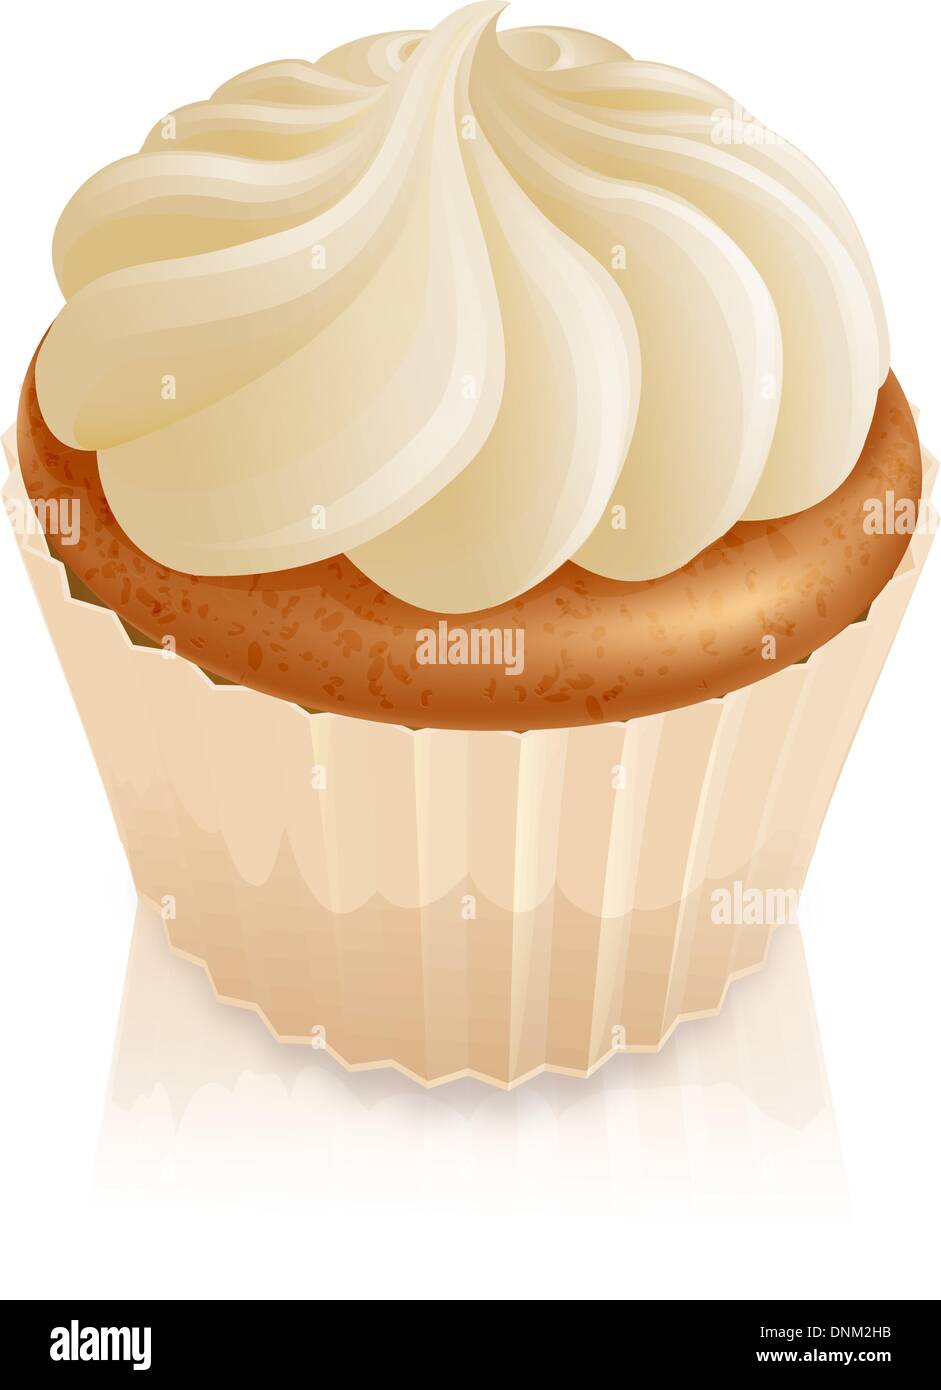 Illustration of fairy cake cupcake with white butter cream icing on top Stock Vector